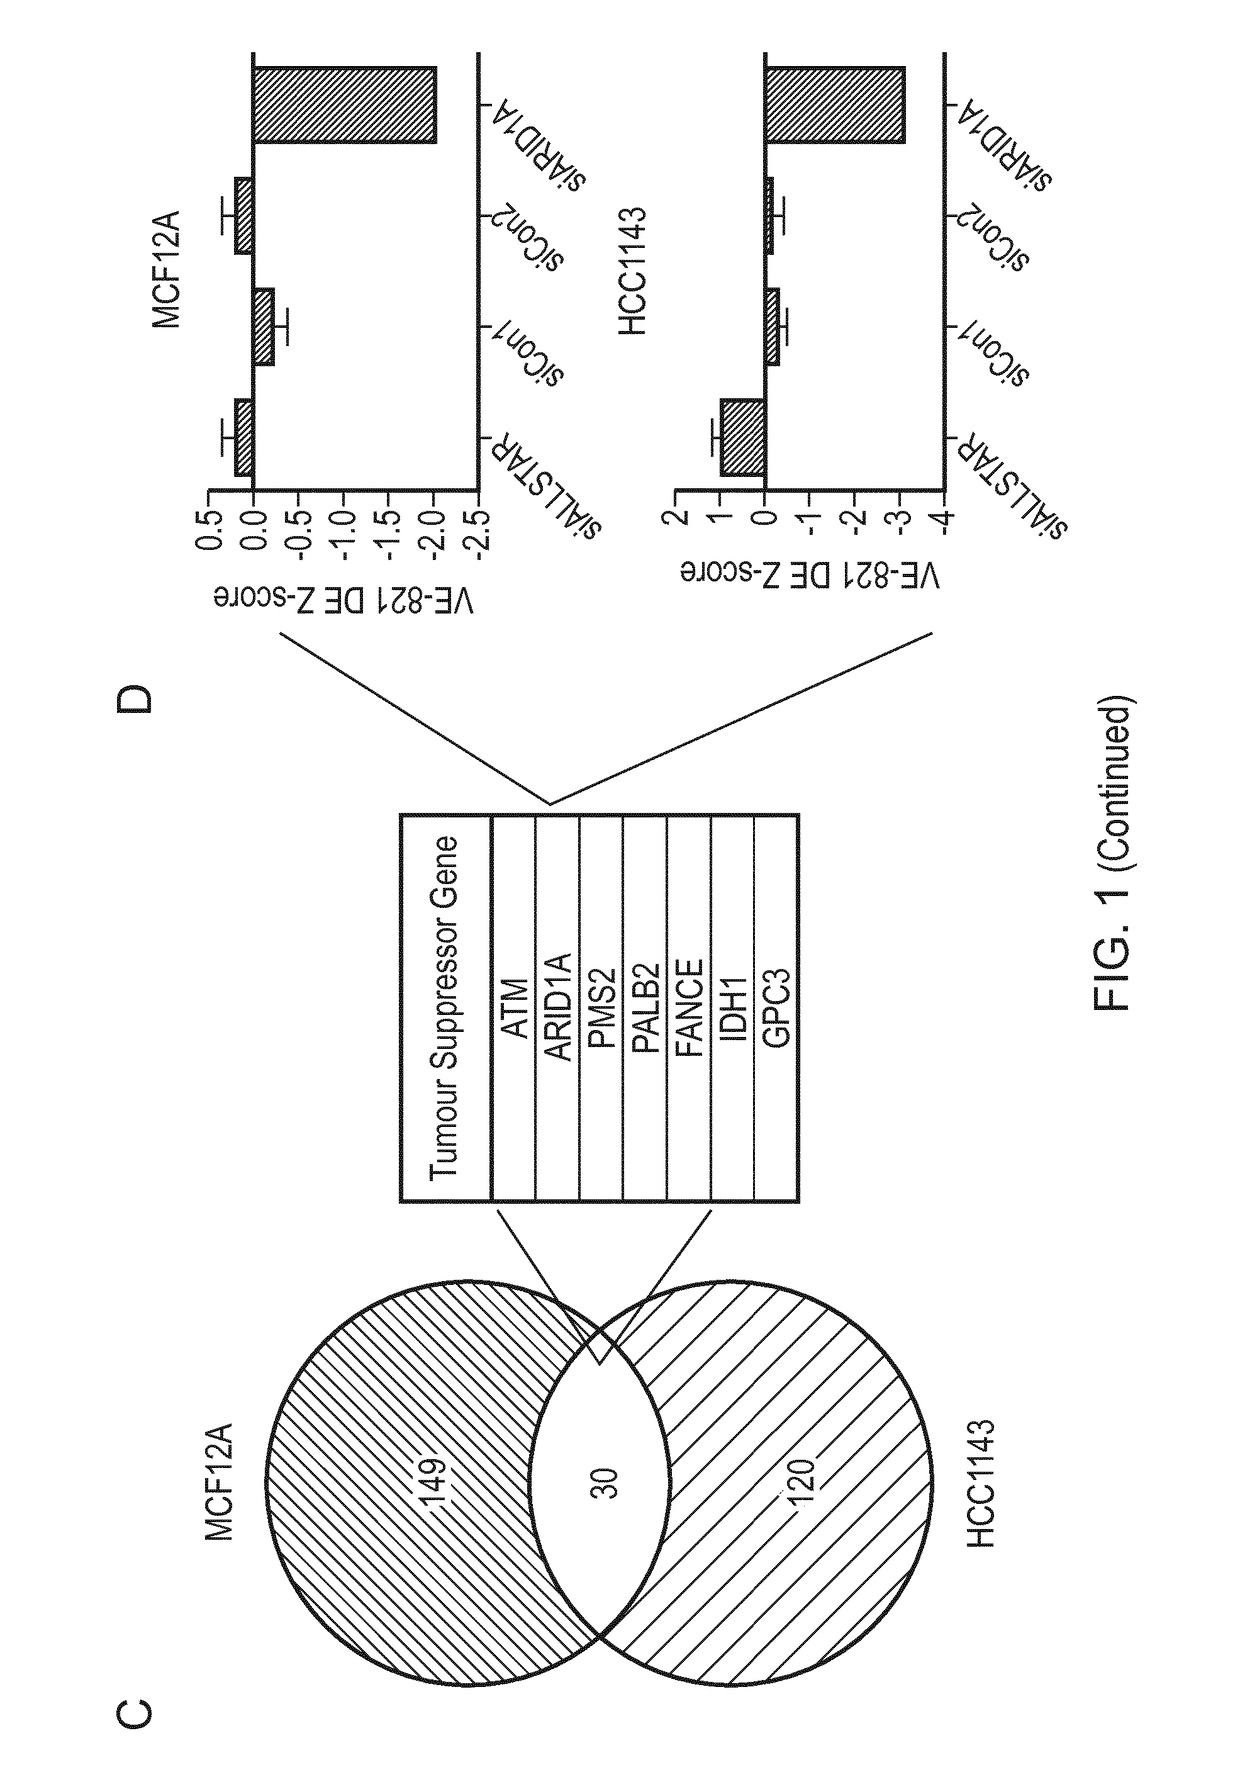 Inhibitors of ataxia-telangiectasia mutated and rad3-related protein kinase (ATR) for use in methods of treating cancer